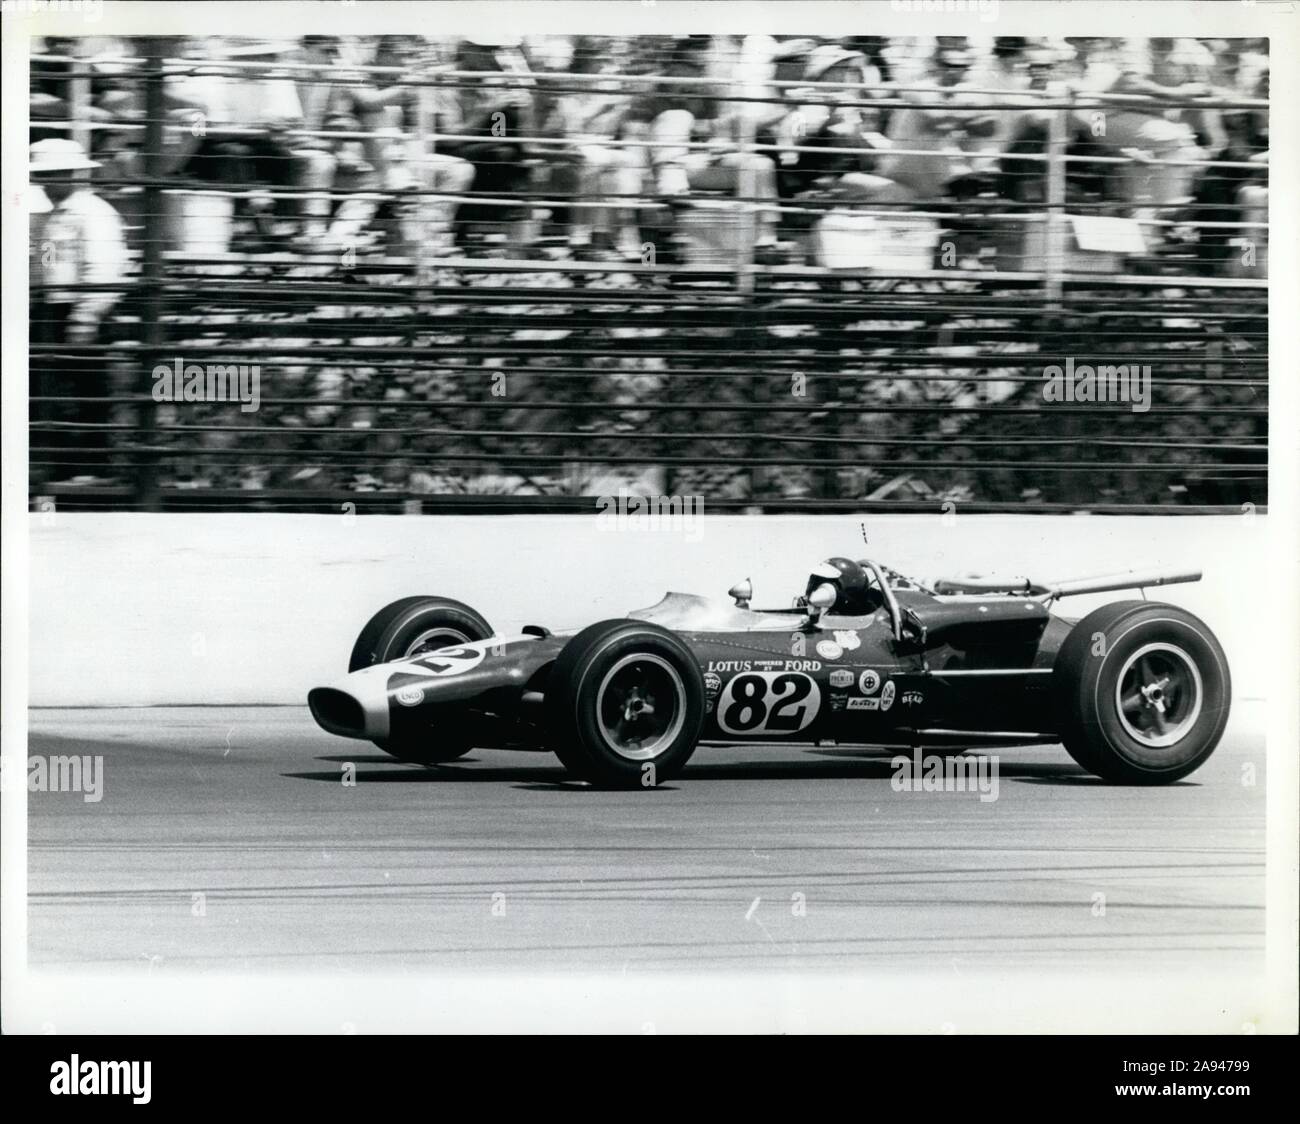 Indianapolis, Indiana, USA. 31st May, 1965. Jim Clark of Scotland heads towards finish line in his Ford powered Lotus 38, and wins 1965 Indy 500 race in Indianapolis. The 49th International 500-Mile Sweepstakes was held at the Indianapolis Motor Speedway in Speedway, Indiana. The five-year-old 'British Invasion' finally broke through as Jim Clark triumphed in dominating fashion with the first rear-engined Indy-winning car, a Lotus 38 powered by Ford. Credit: Keystone Pictures USA/ZUMAPRESS.com/Alamy Live News Stock Photo